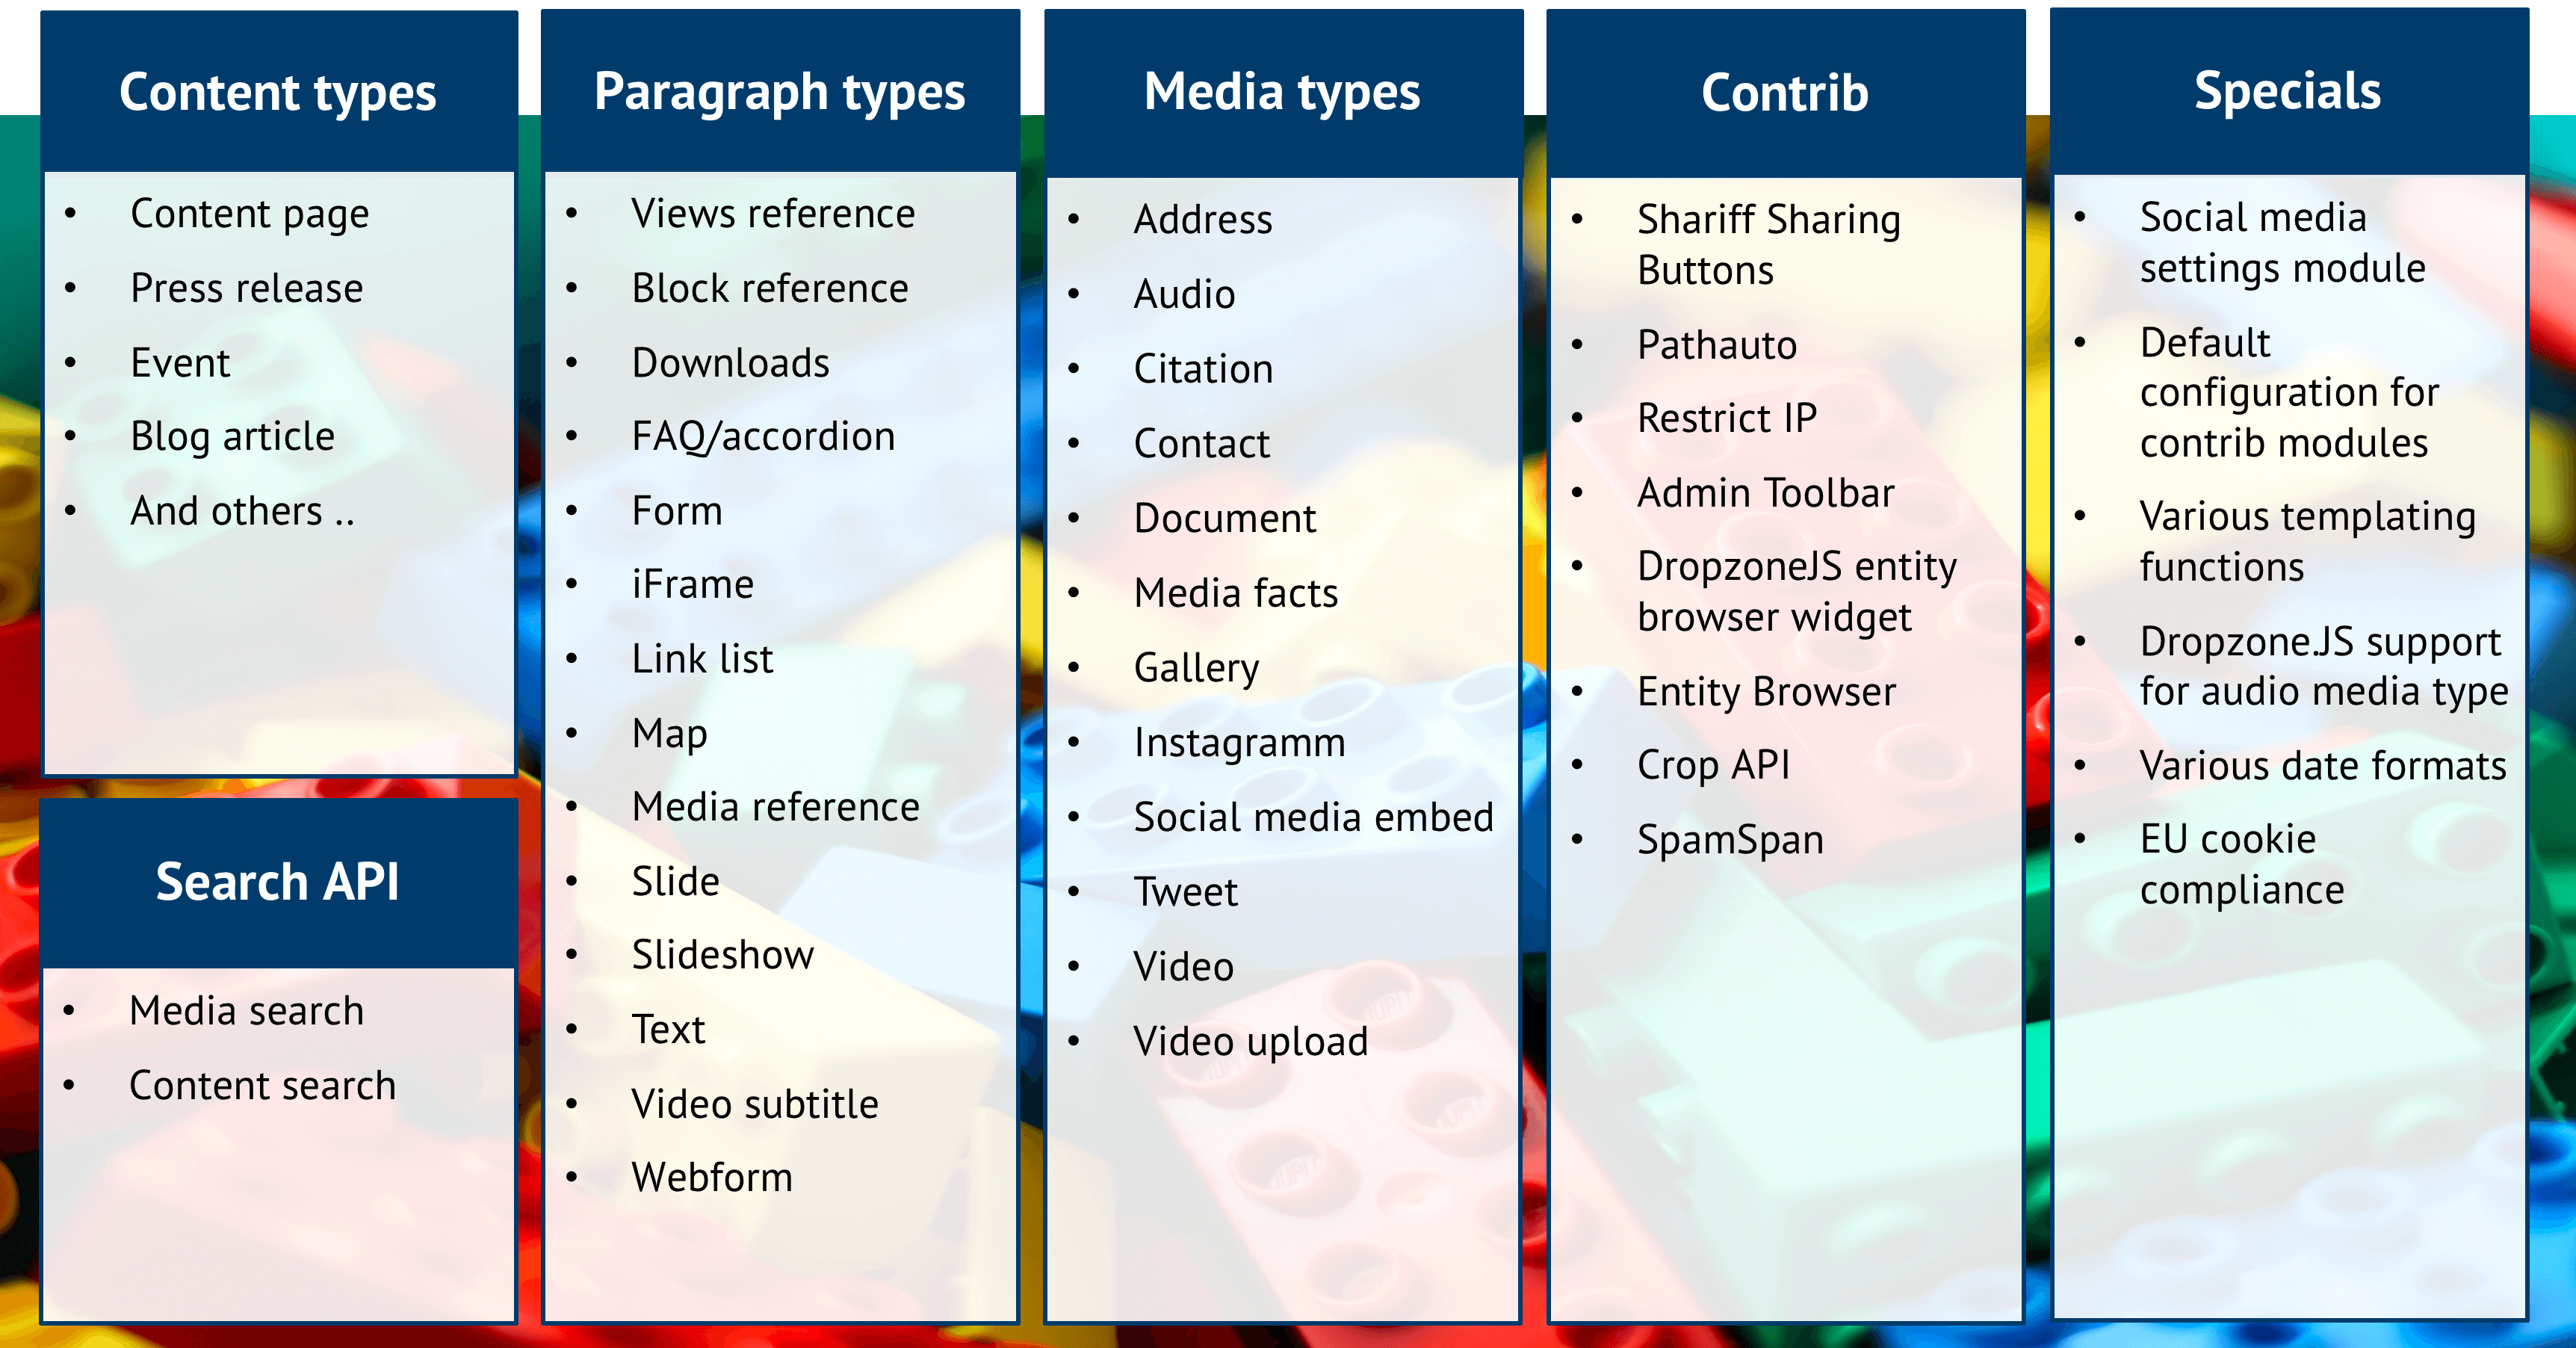 Image of a table having the list of all media types